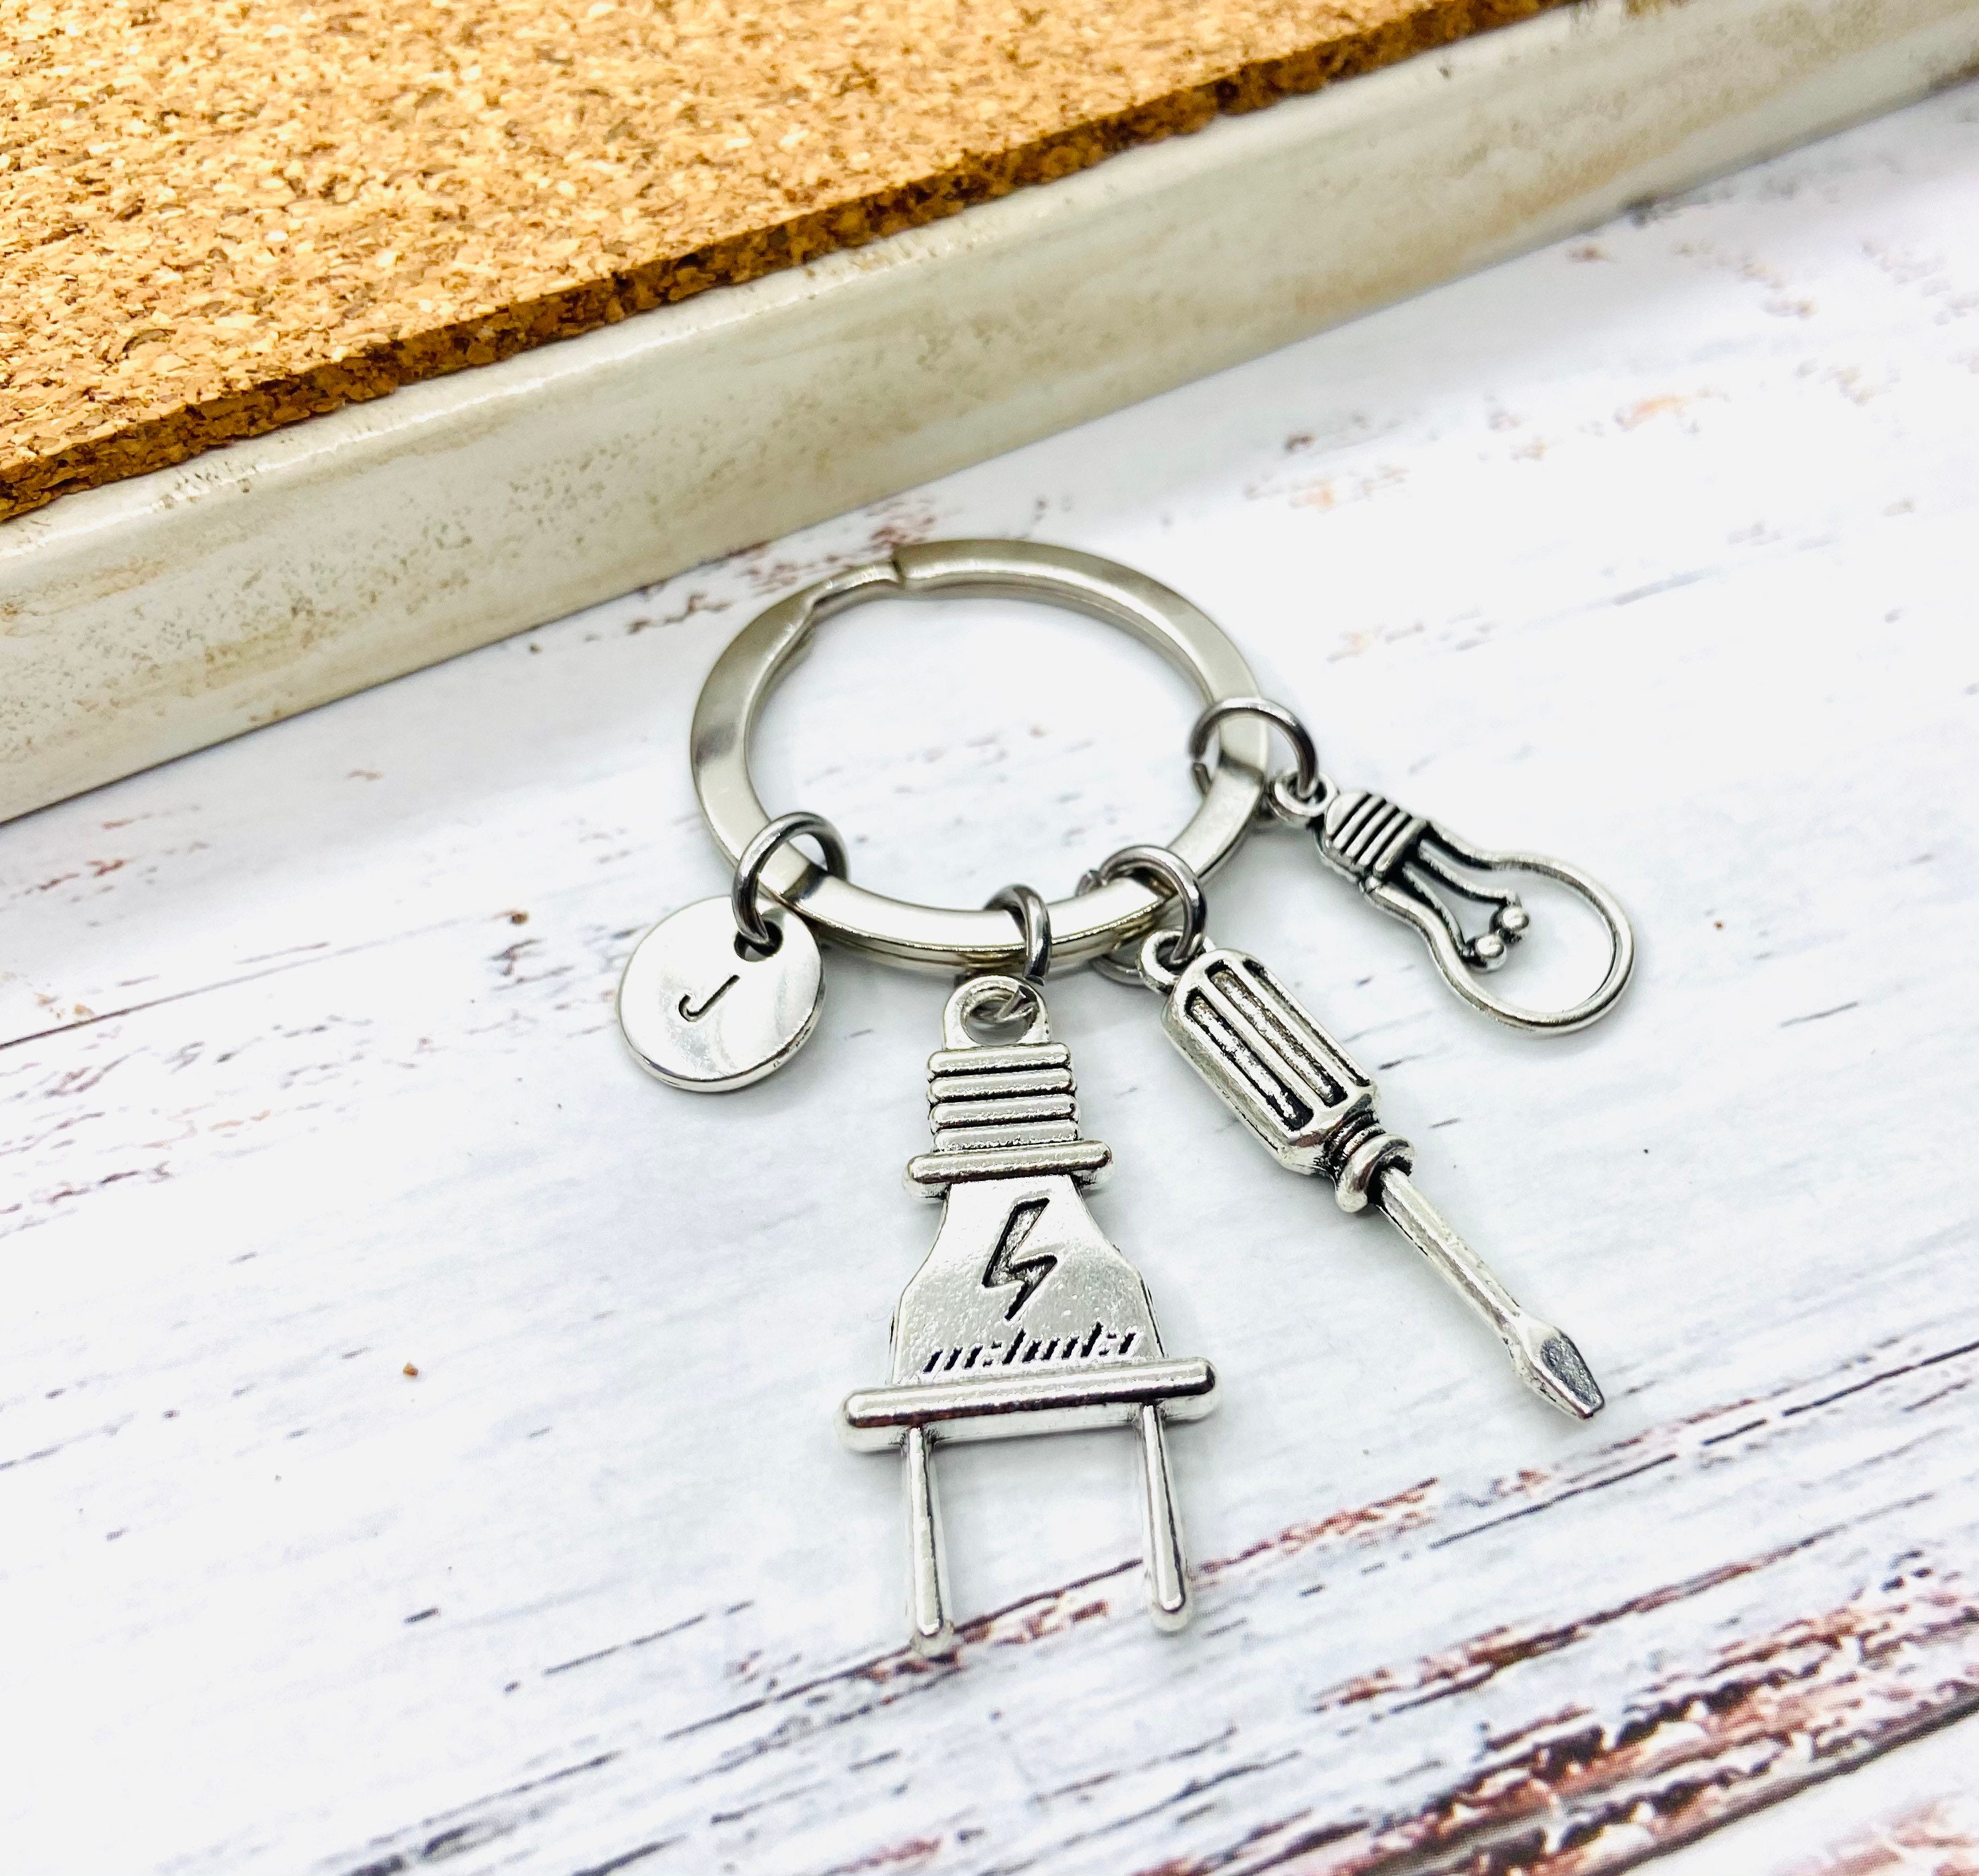 13. Electrical Engineer Keychain Gift